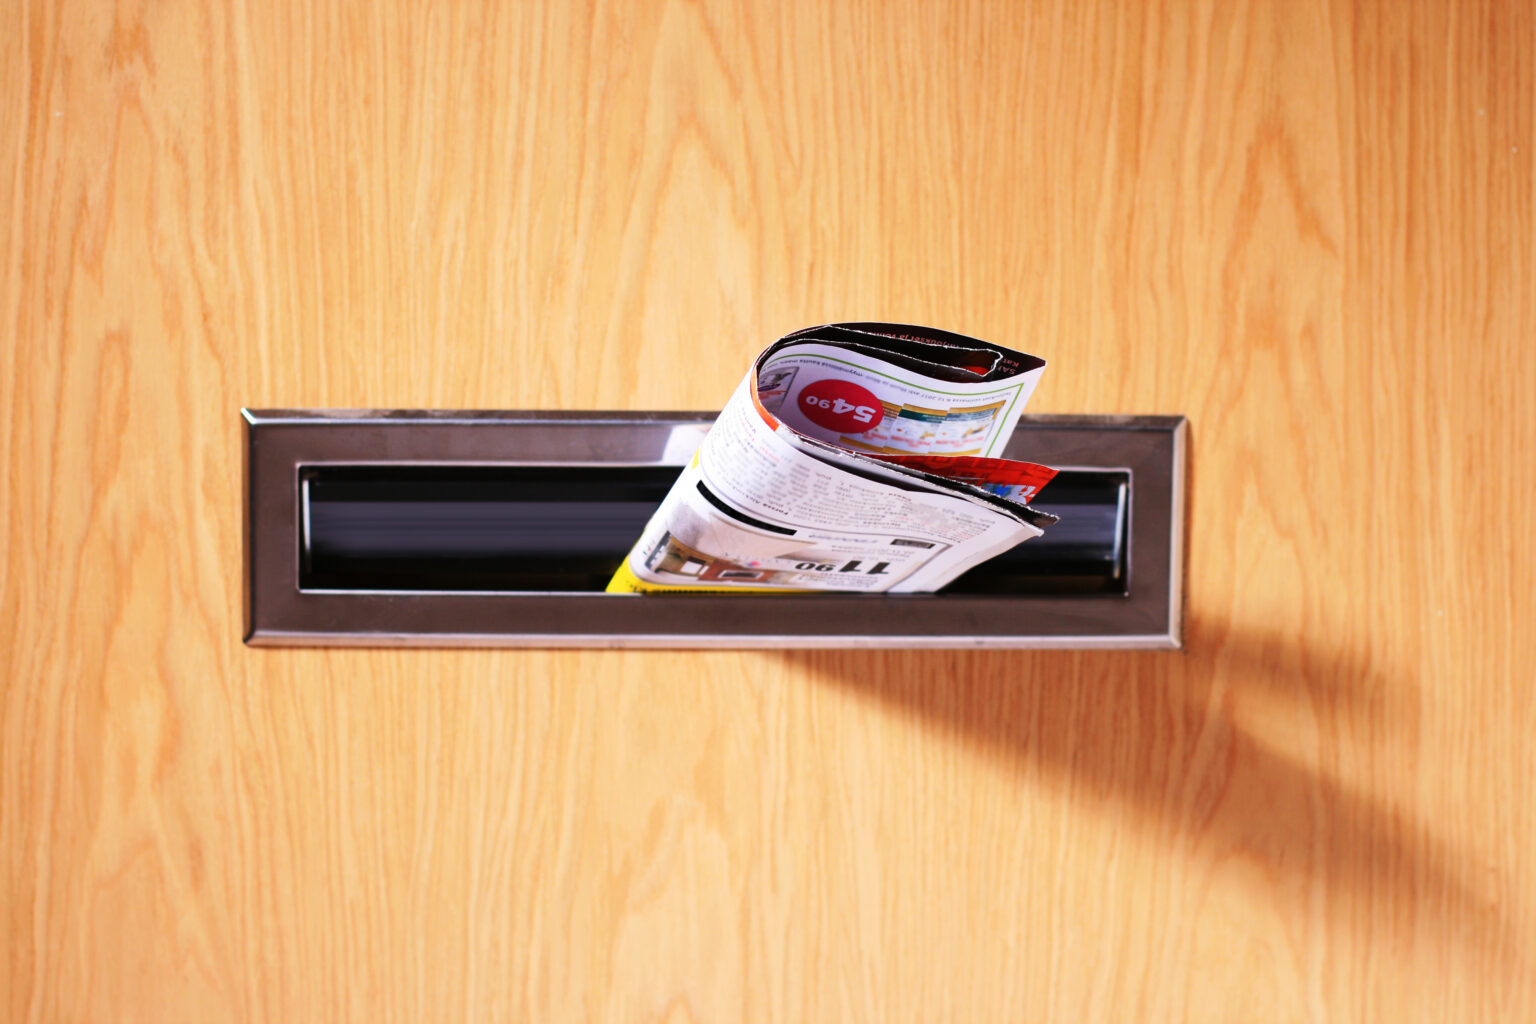 An image of a promotional flyer sticking out of a mailbox in a wooden door.